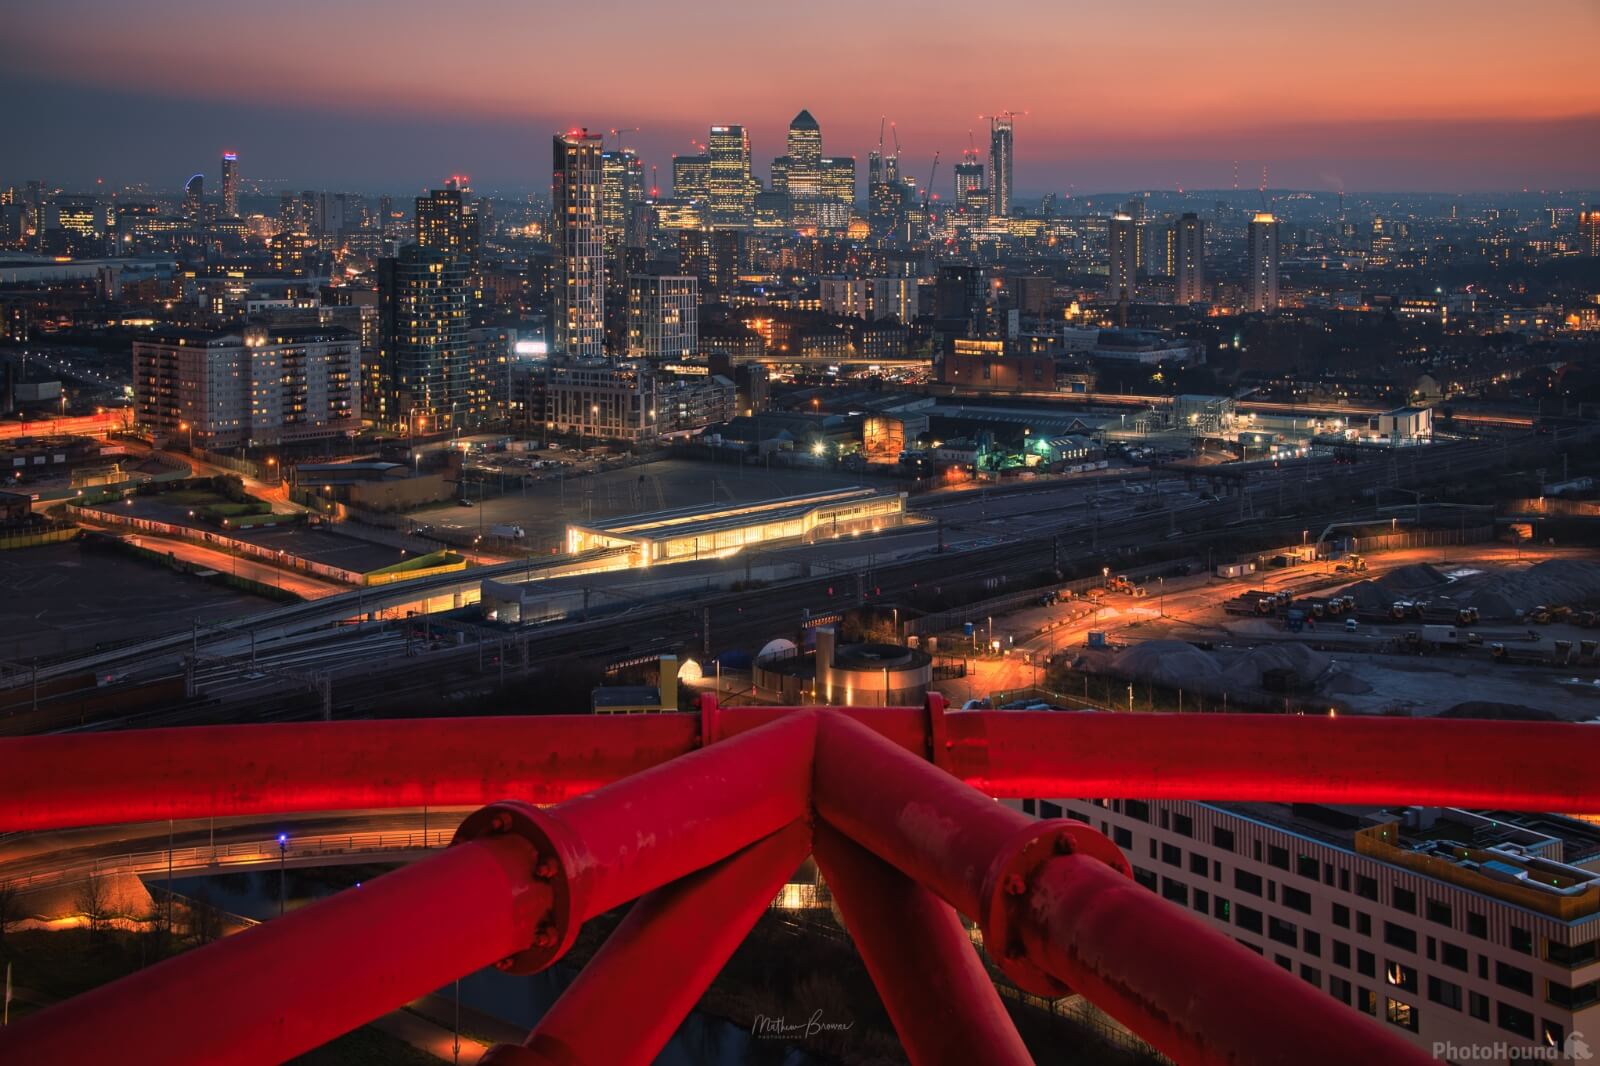 Image of View from ArcelorMittal Orbit by Mathew Browne